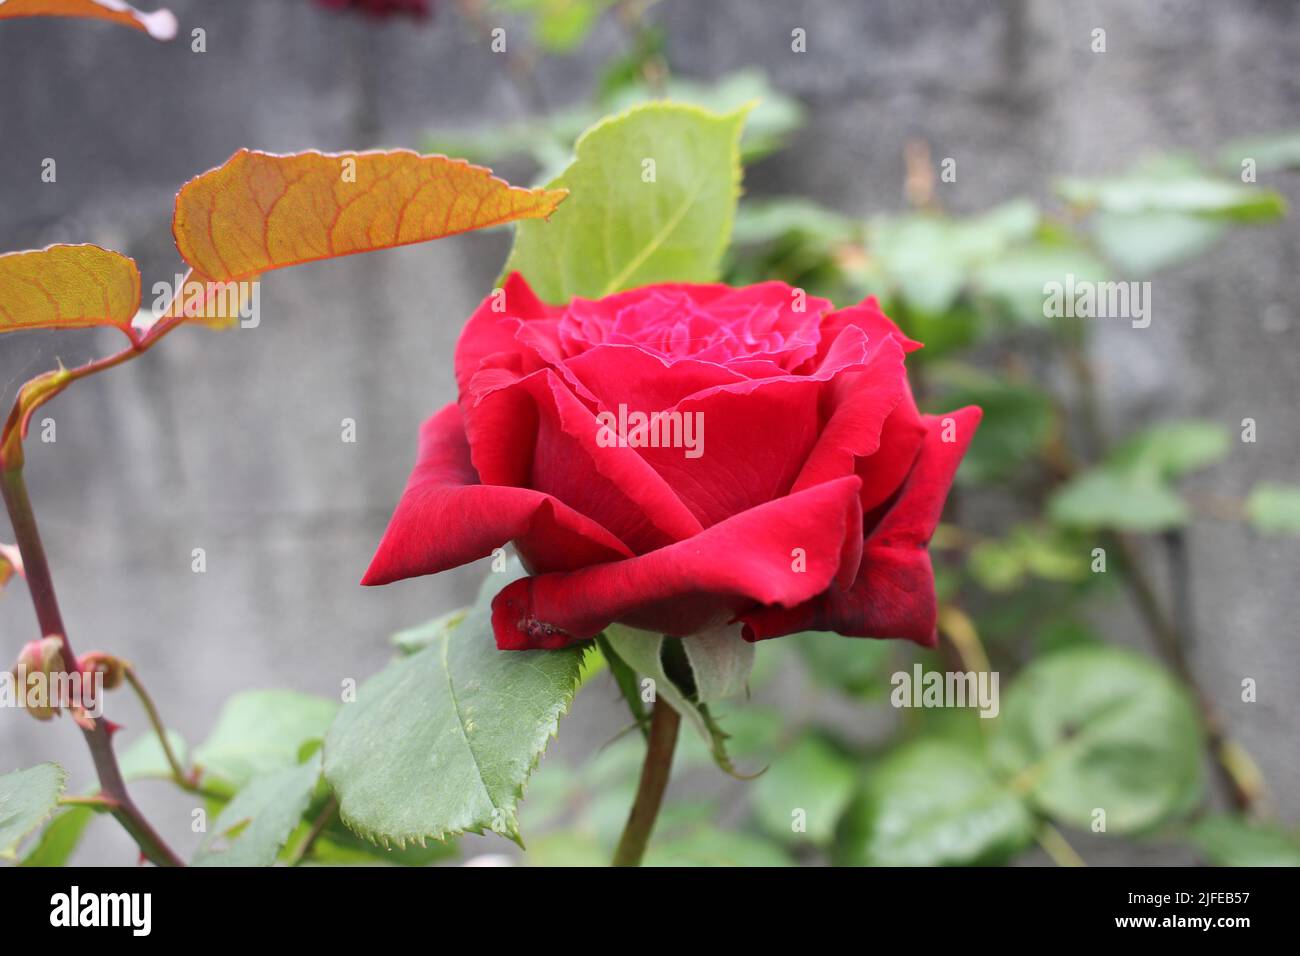 this rose is living its maturity and showing its amazing beauty Stock Photo